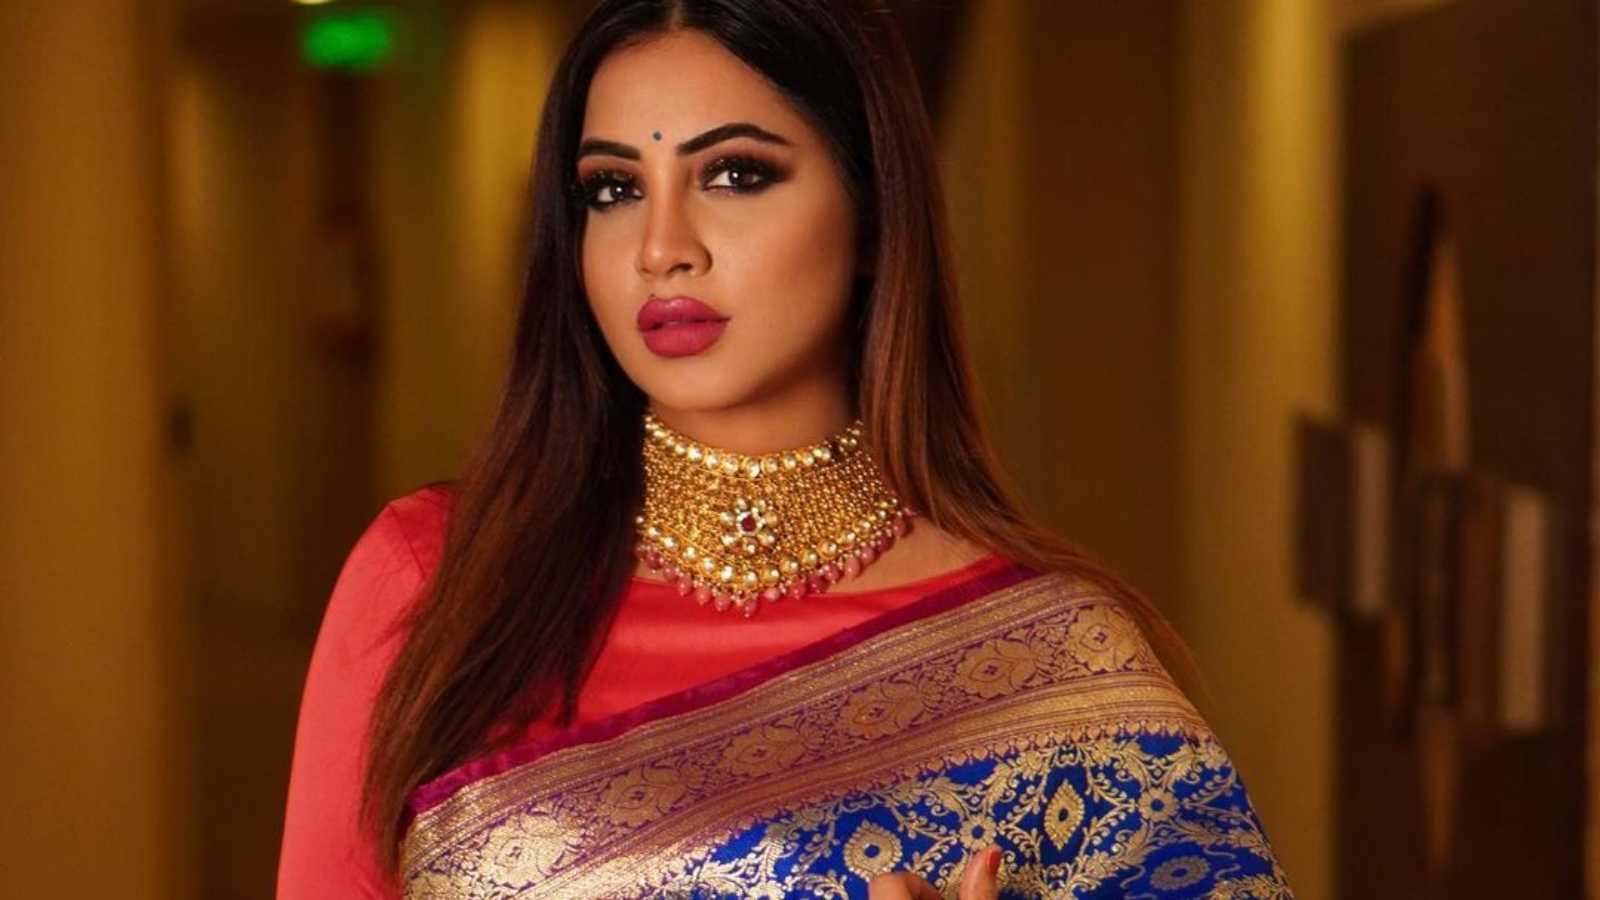 Ex Bigg Boss contestant Arshi Khan confirms she planning to marry her businessman boyfriend, refuses to make his identity public